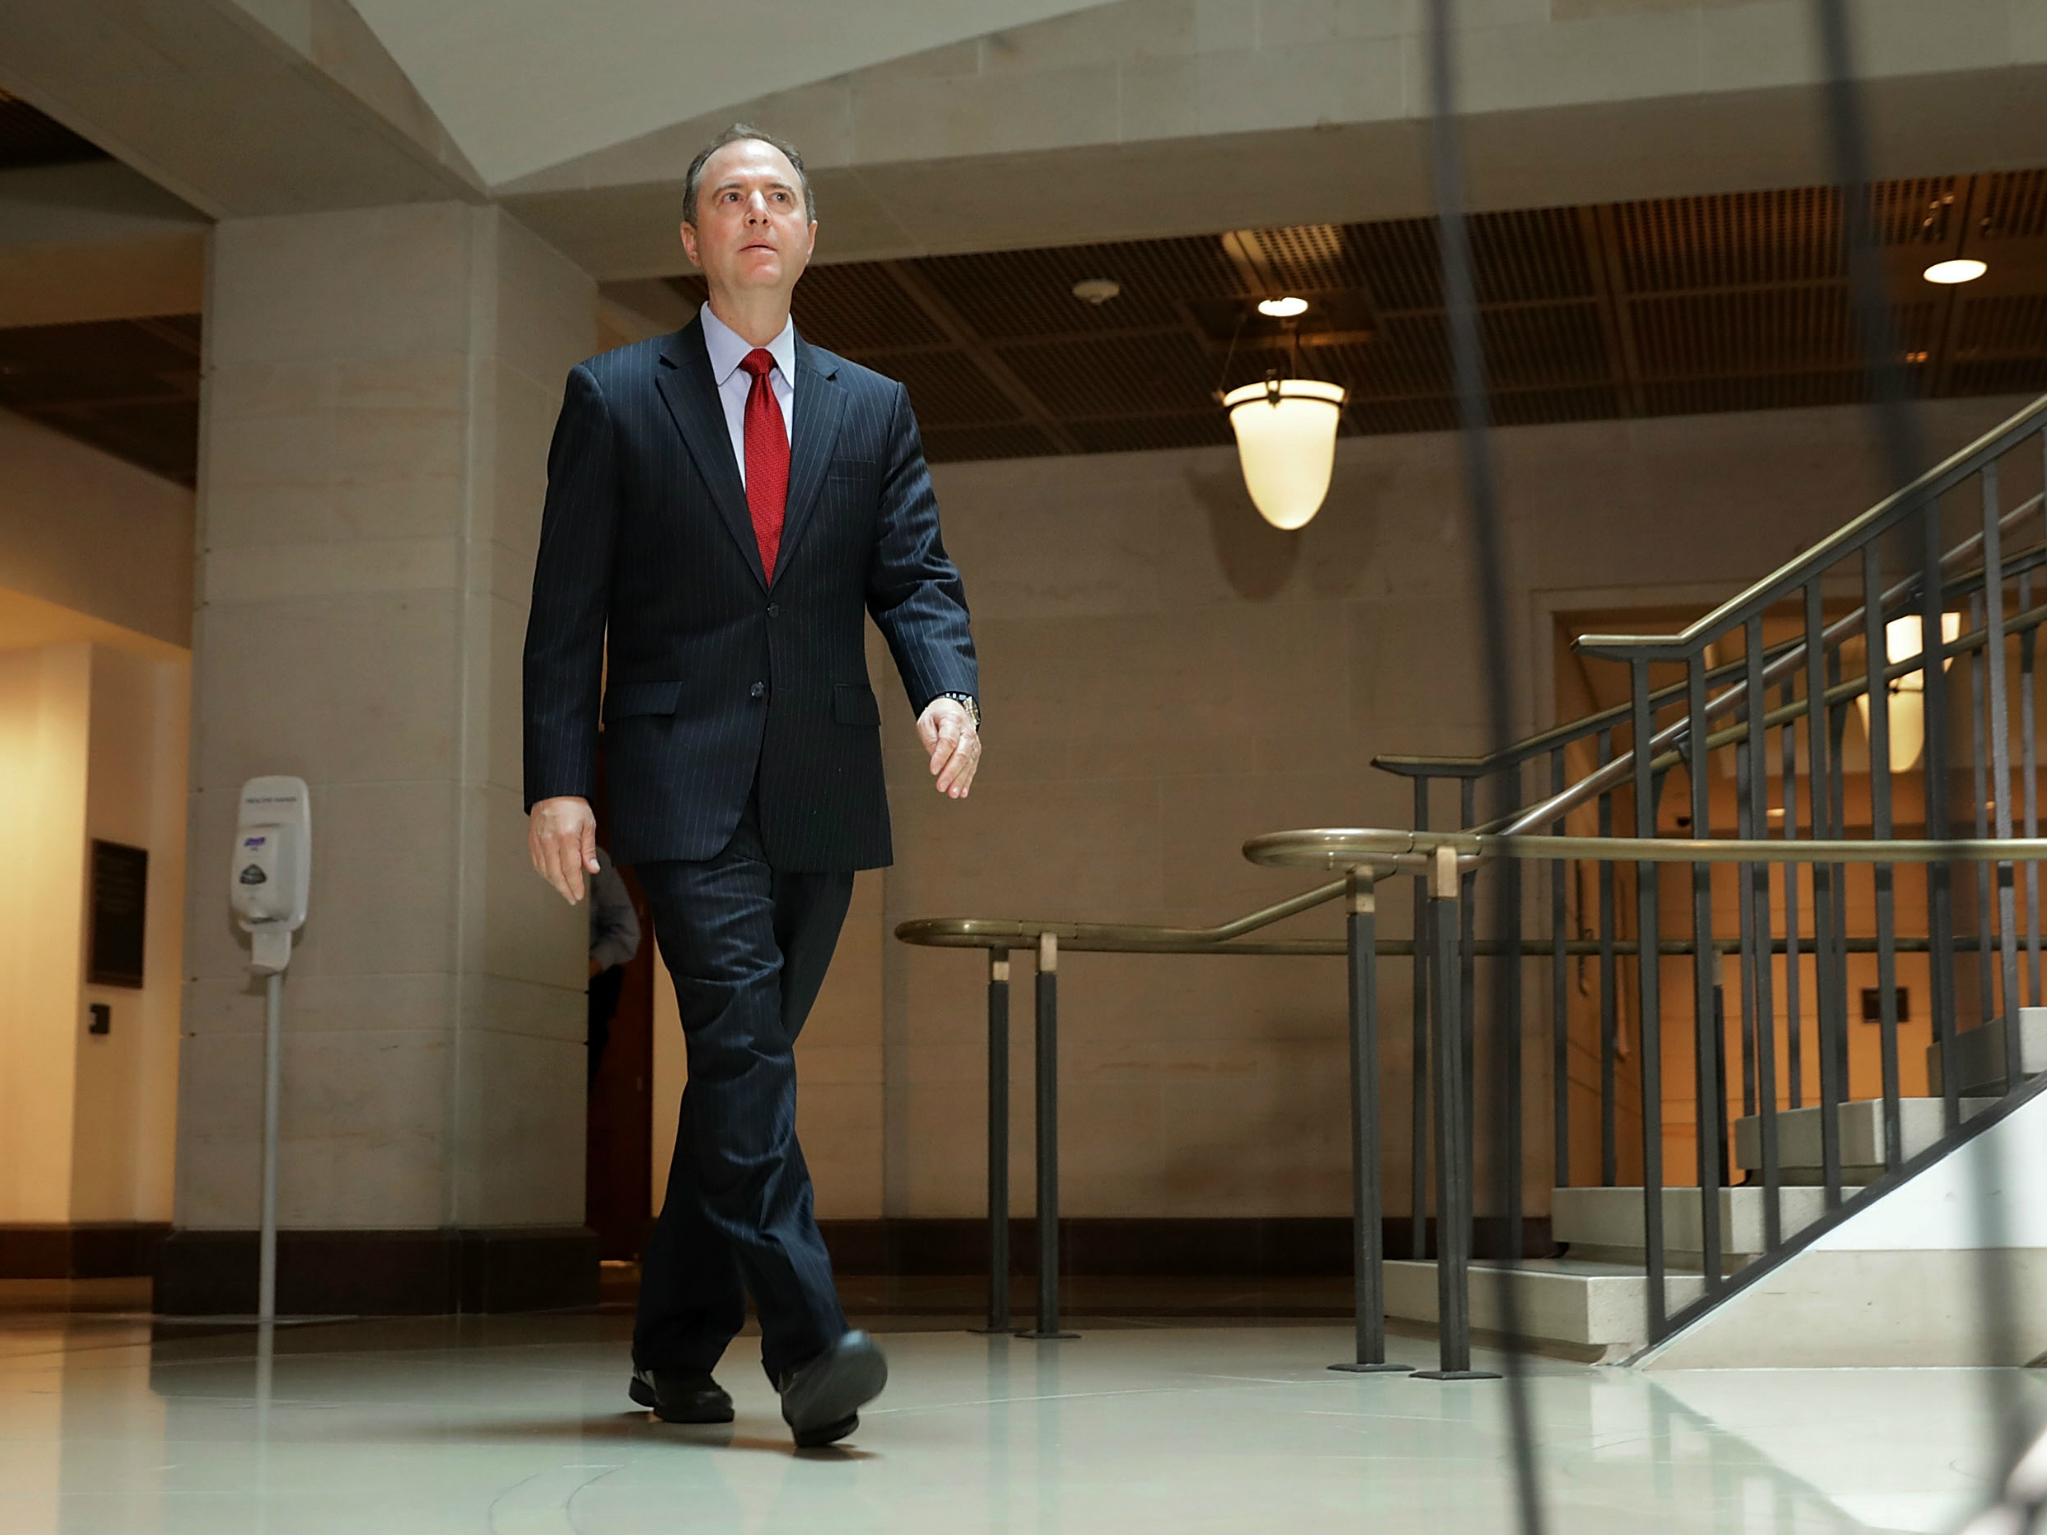 House Intelligence Committee ranking member Democratic Representative Adam Schiff is leading one of the parallel investigations into alleged ties between Russia and the Trump campaign.